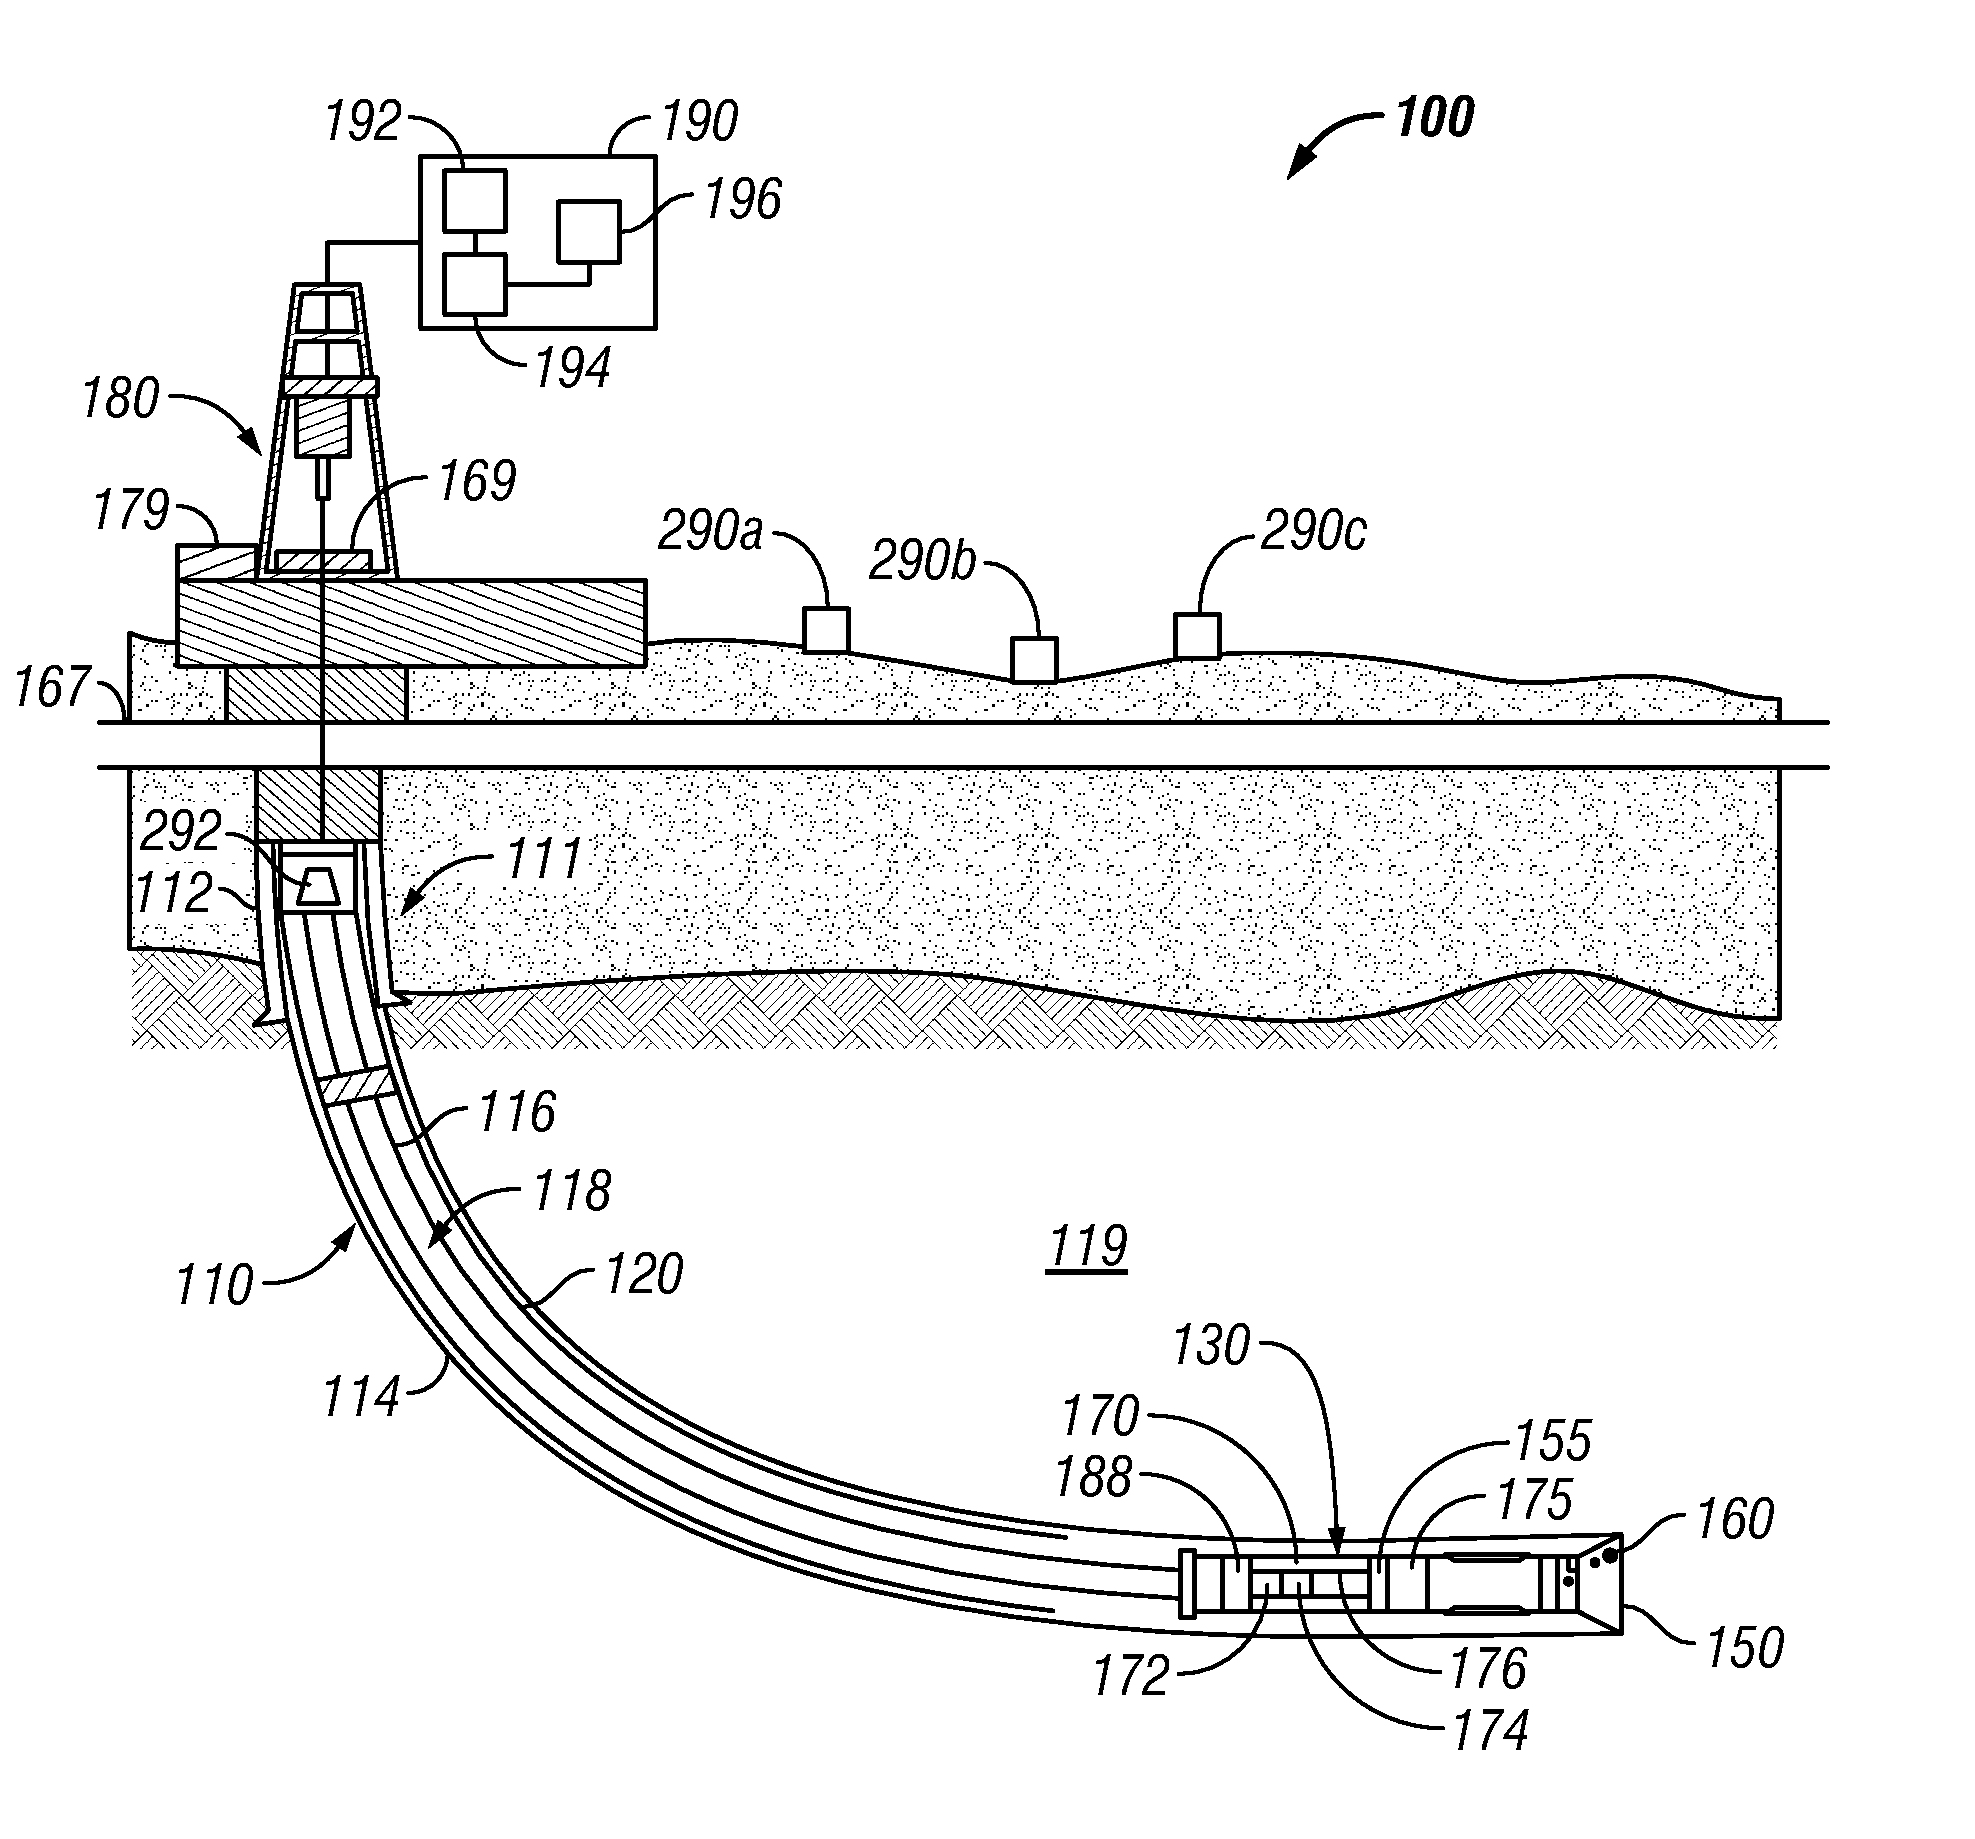 Bit Based Formation Evaluation and Drill Bit and Drill String Analysis Using an Acoustic Sensor